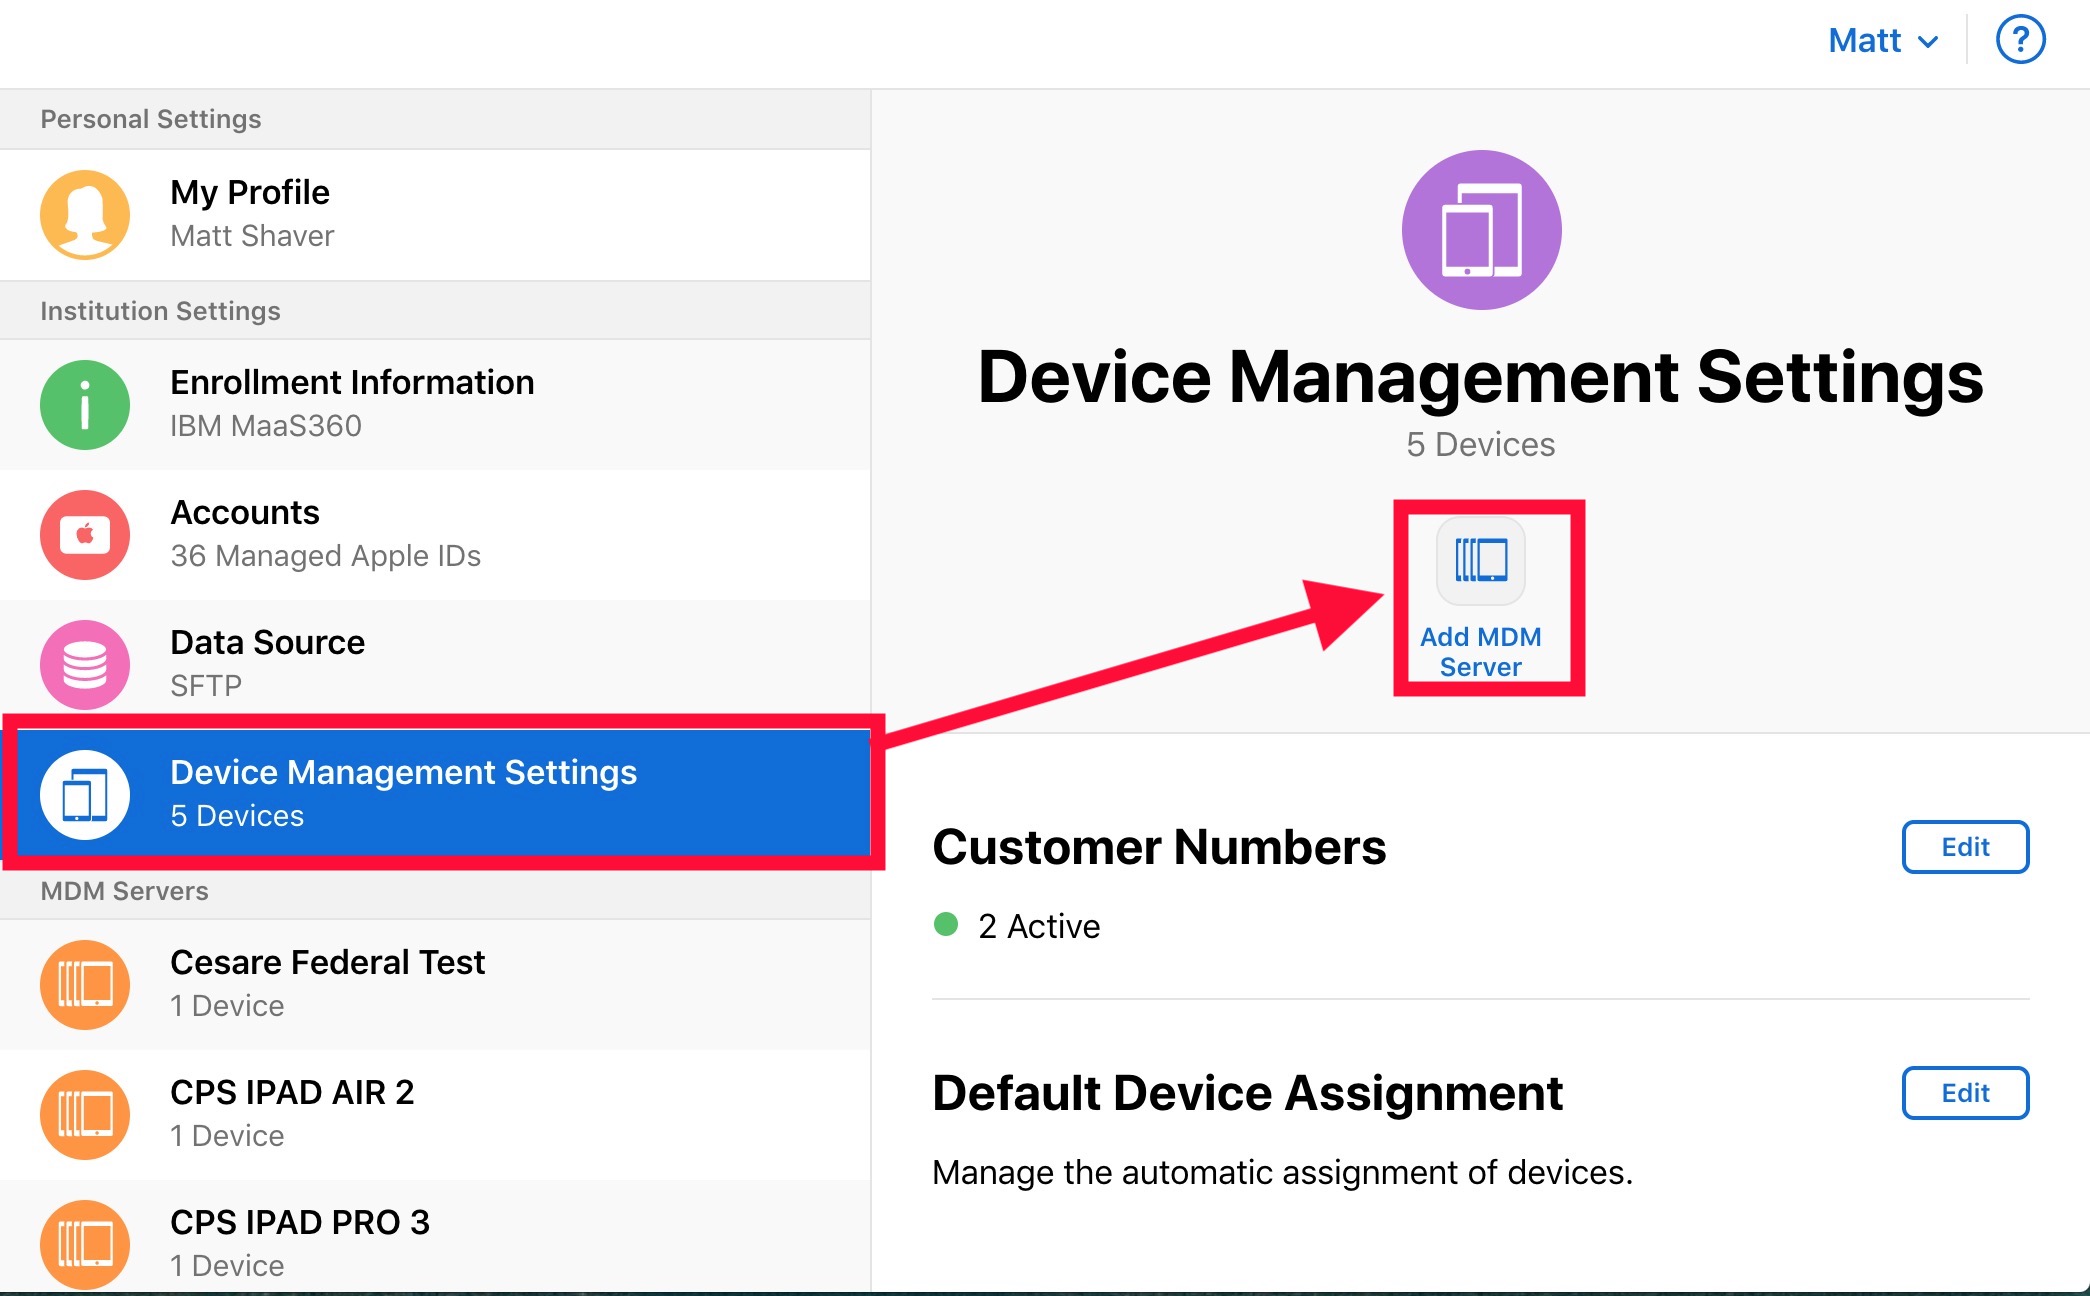 How to create the MDM Server in Apple Business Manager (ABM) and Apple